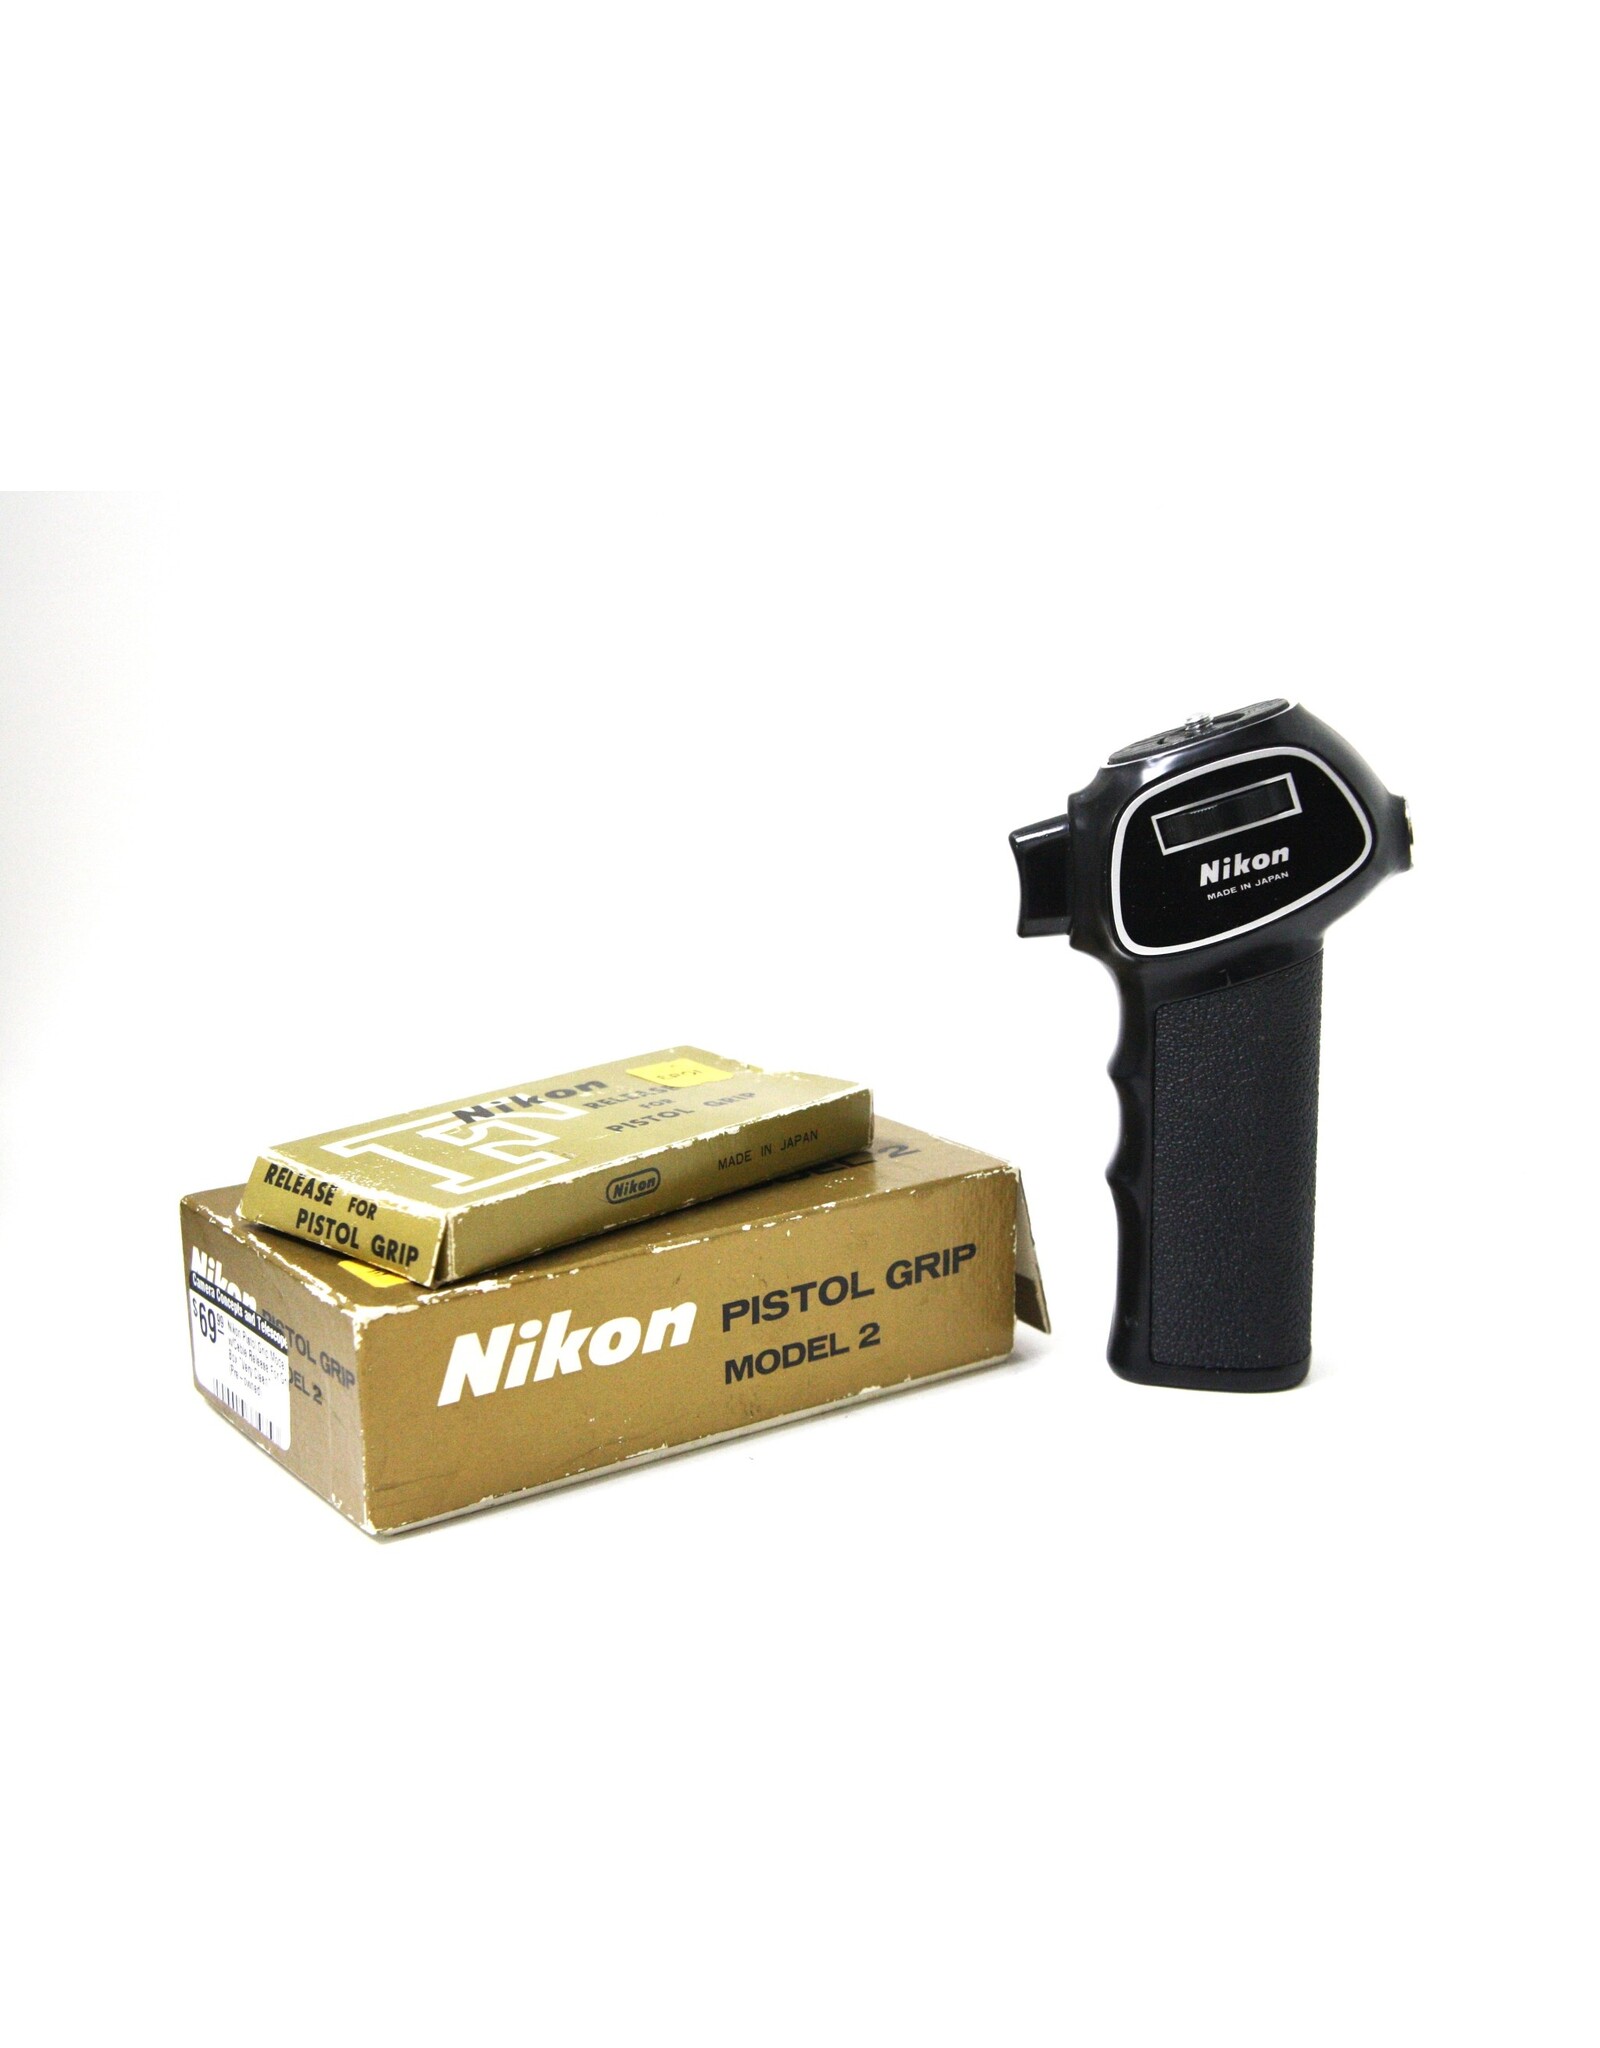 Nikon Nikon Pistol Grip Model 2 w/Cable Release For Grip / Box *Very Clean* (Pre-owned)